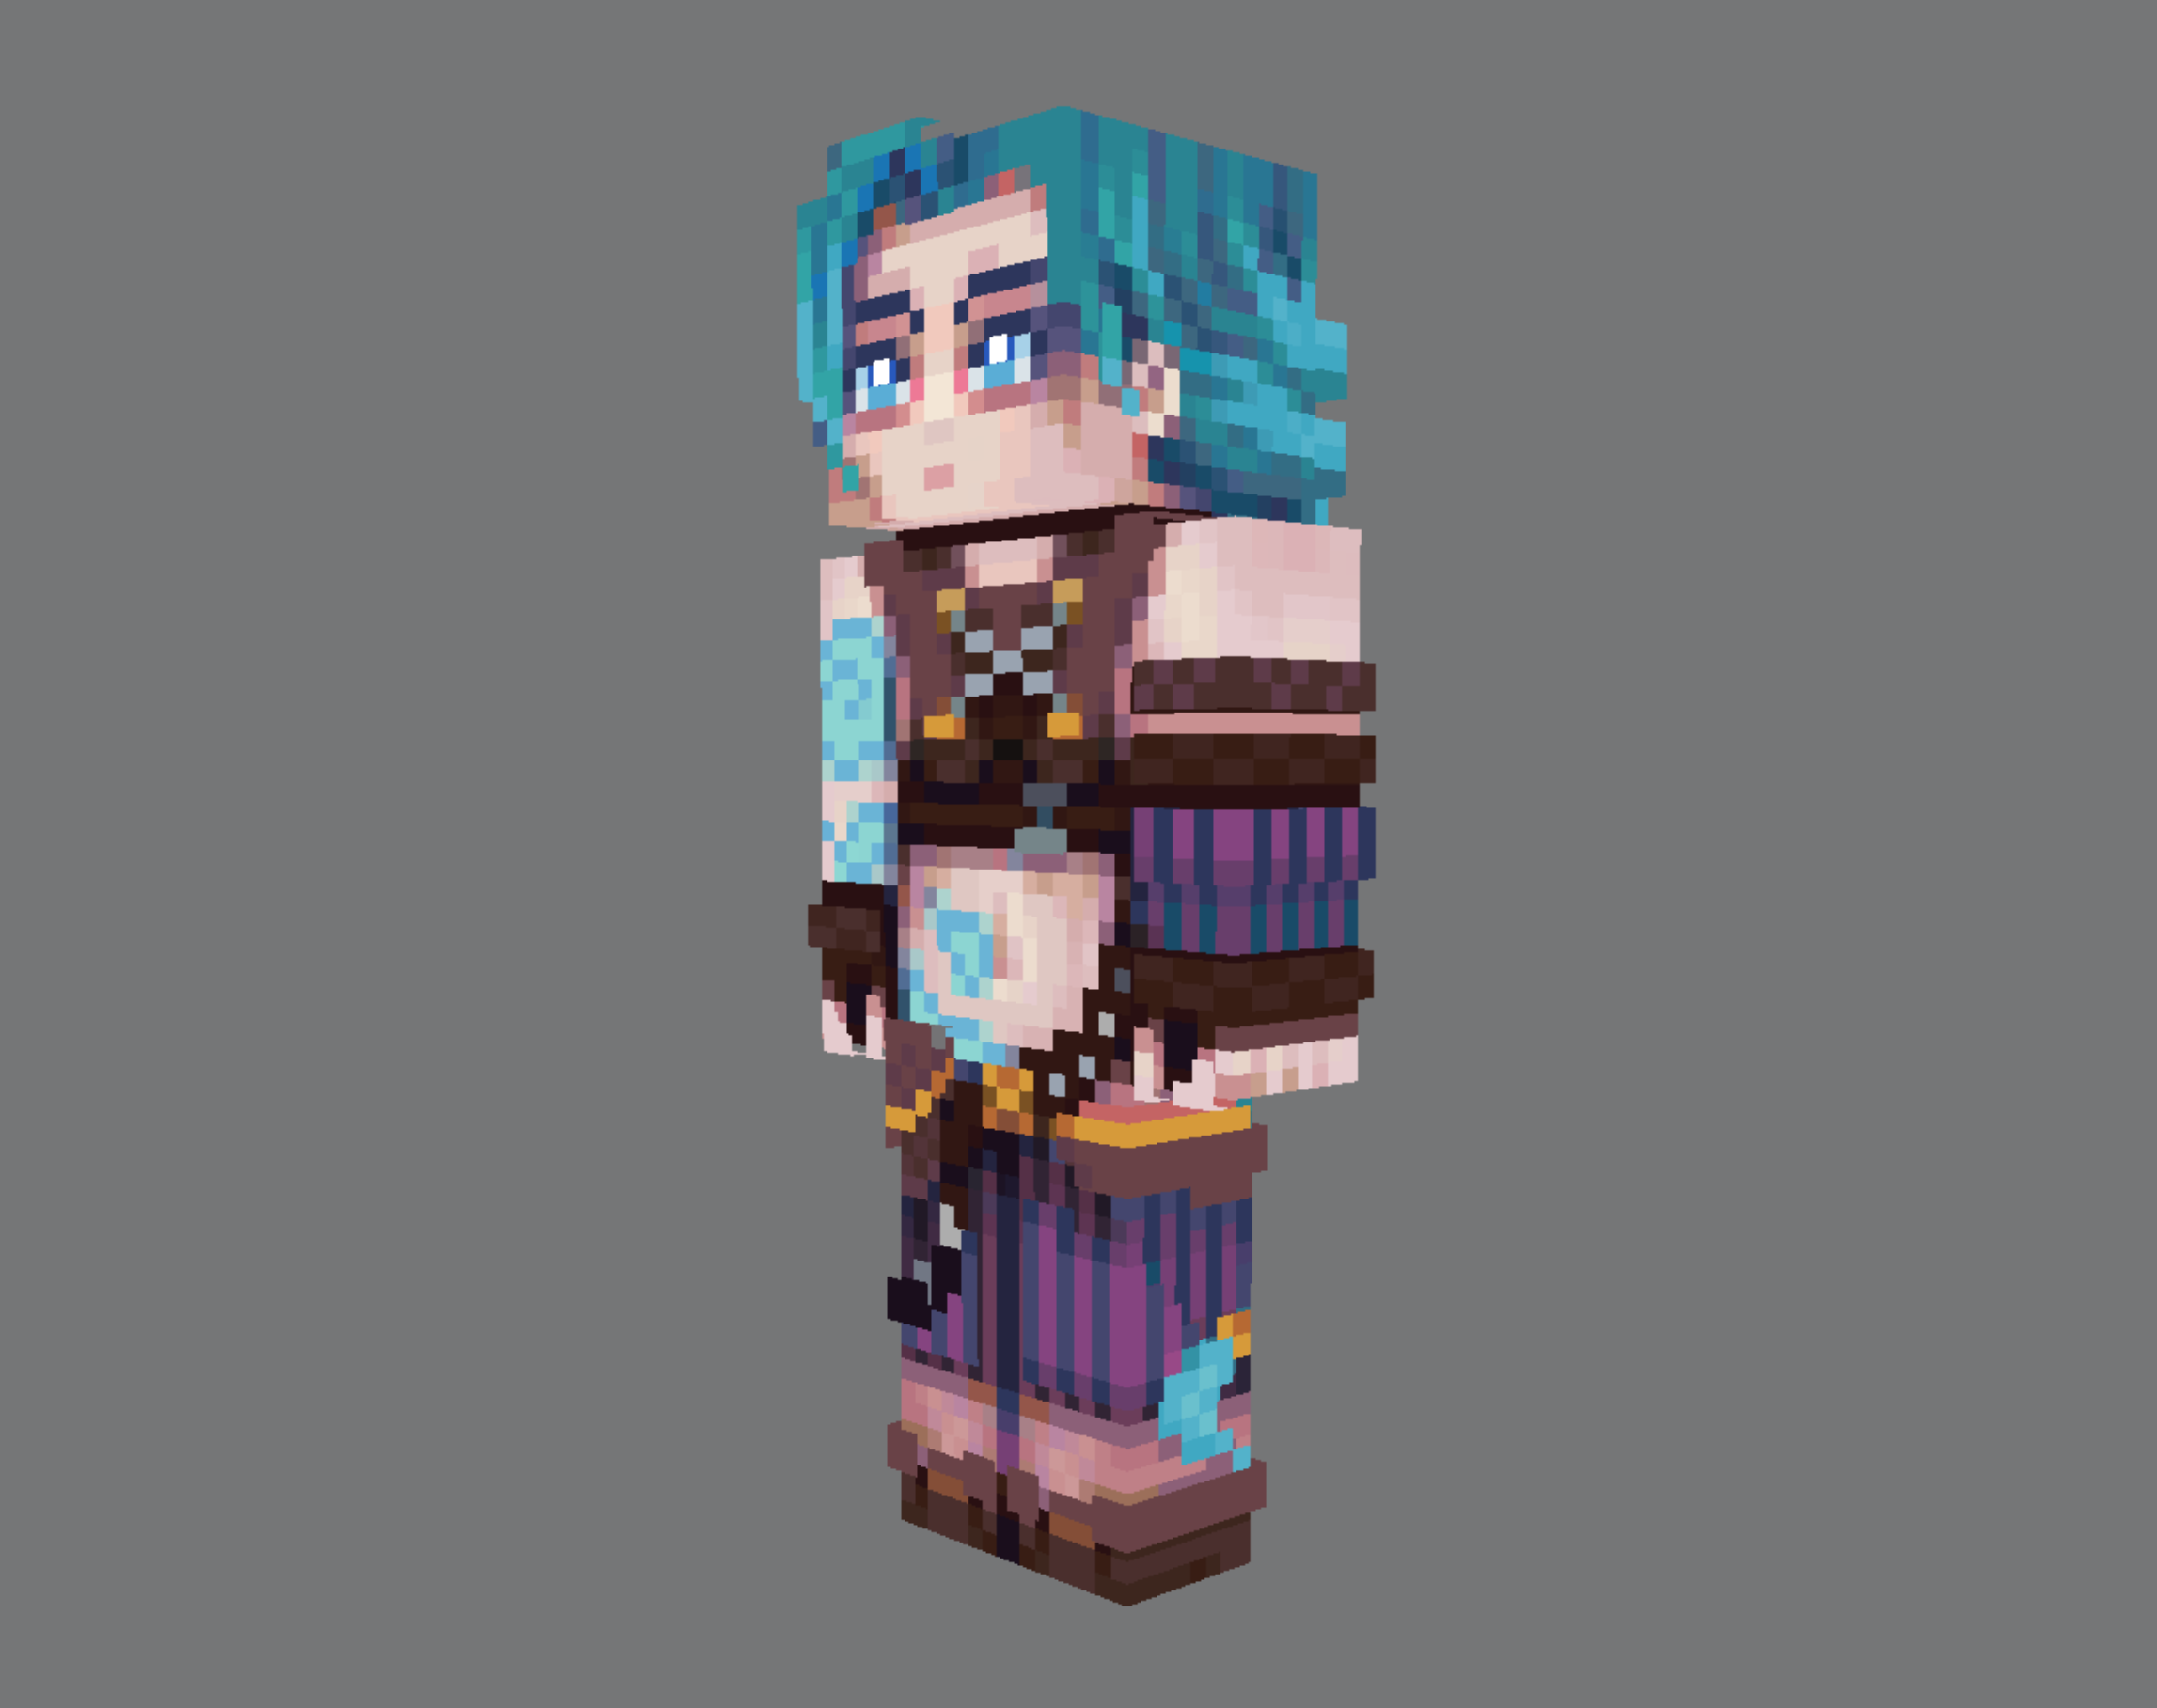 Jinx Hd Minecraft Skin Campestral S Ko Fi Shop Ko Fi Where Creators Get Support From Fans Through Donations Memberships Shop Sales And More The Original Buy Me A Coffee Page